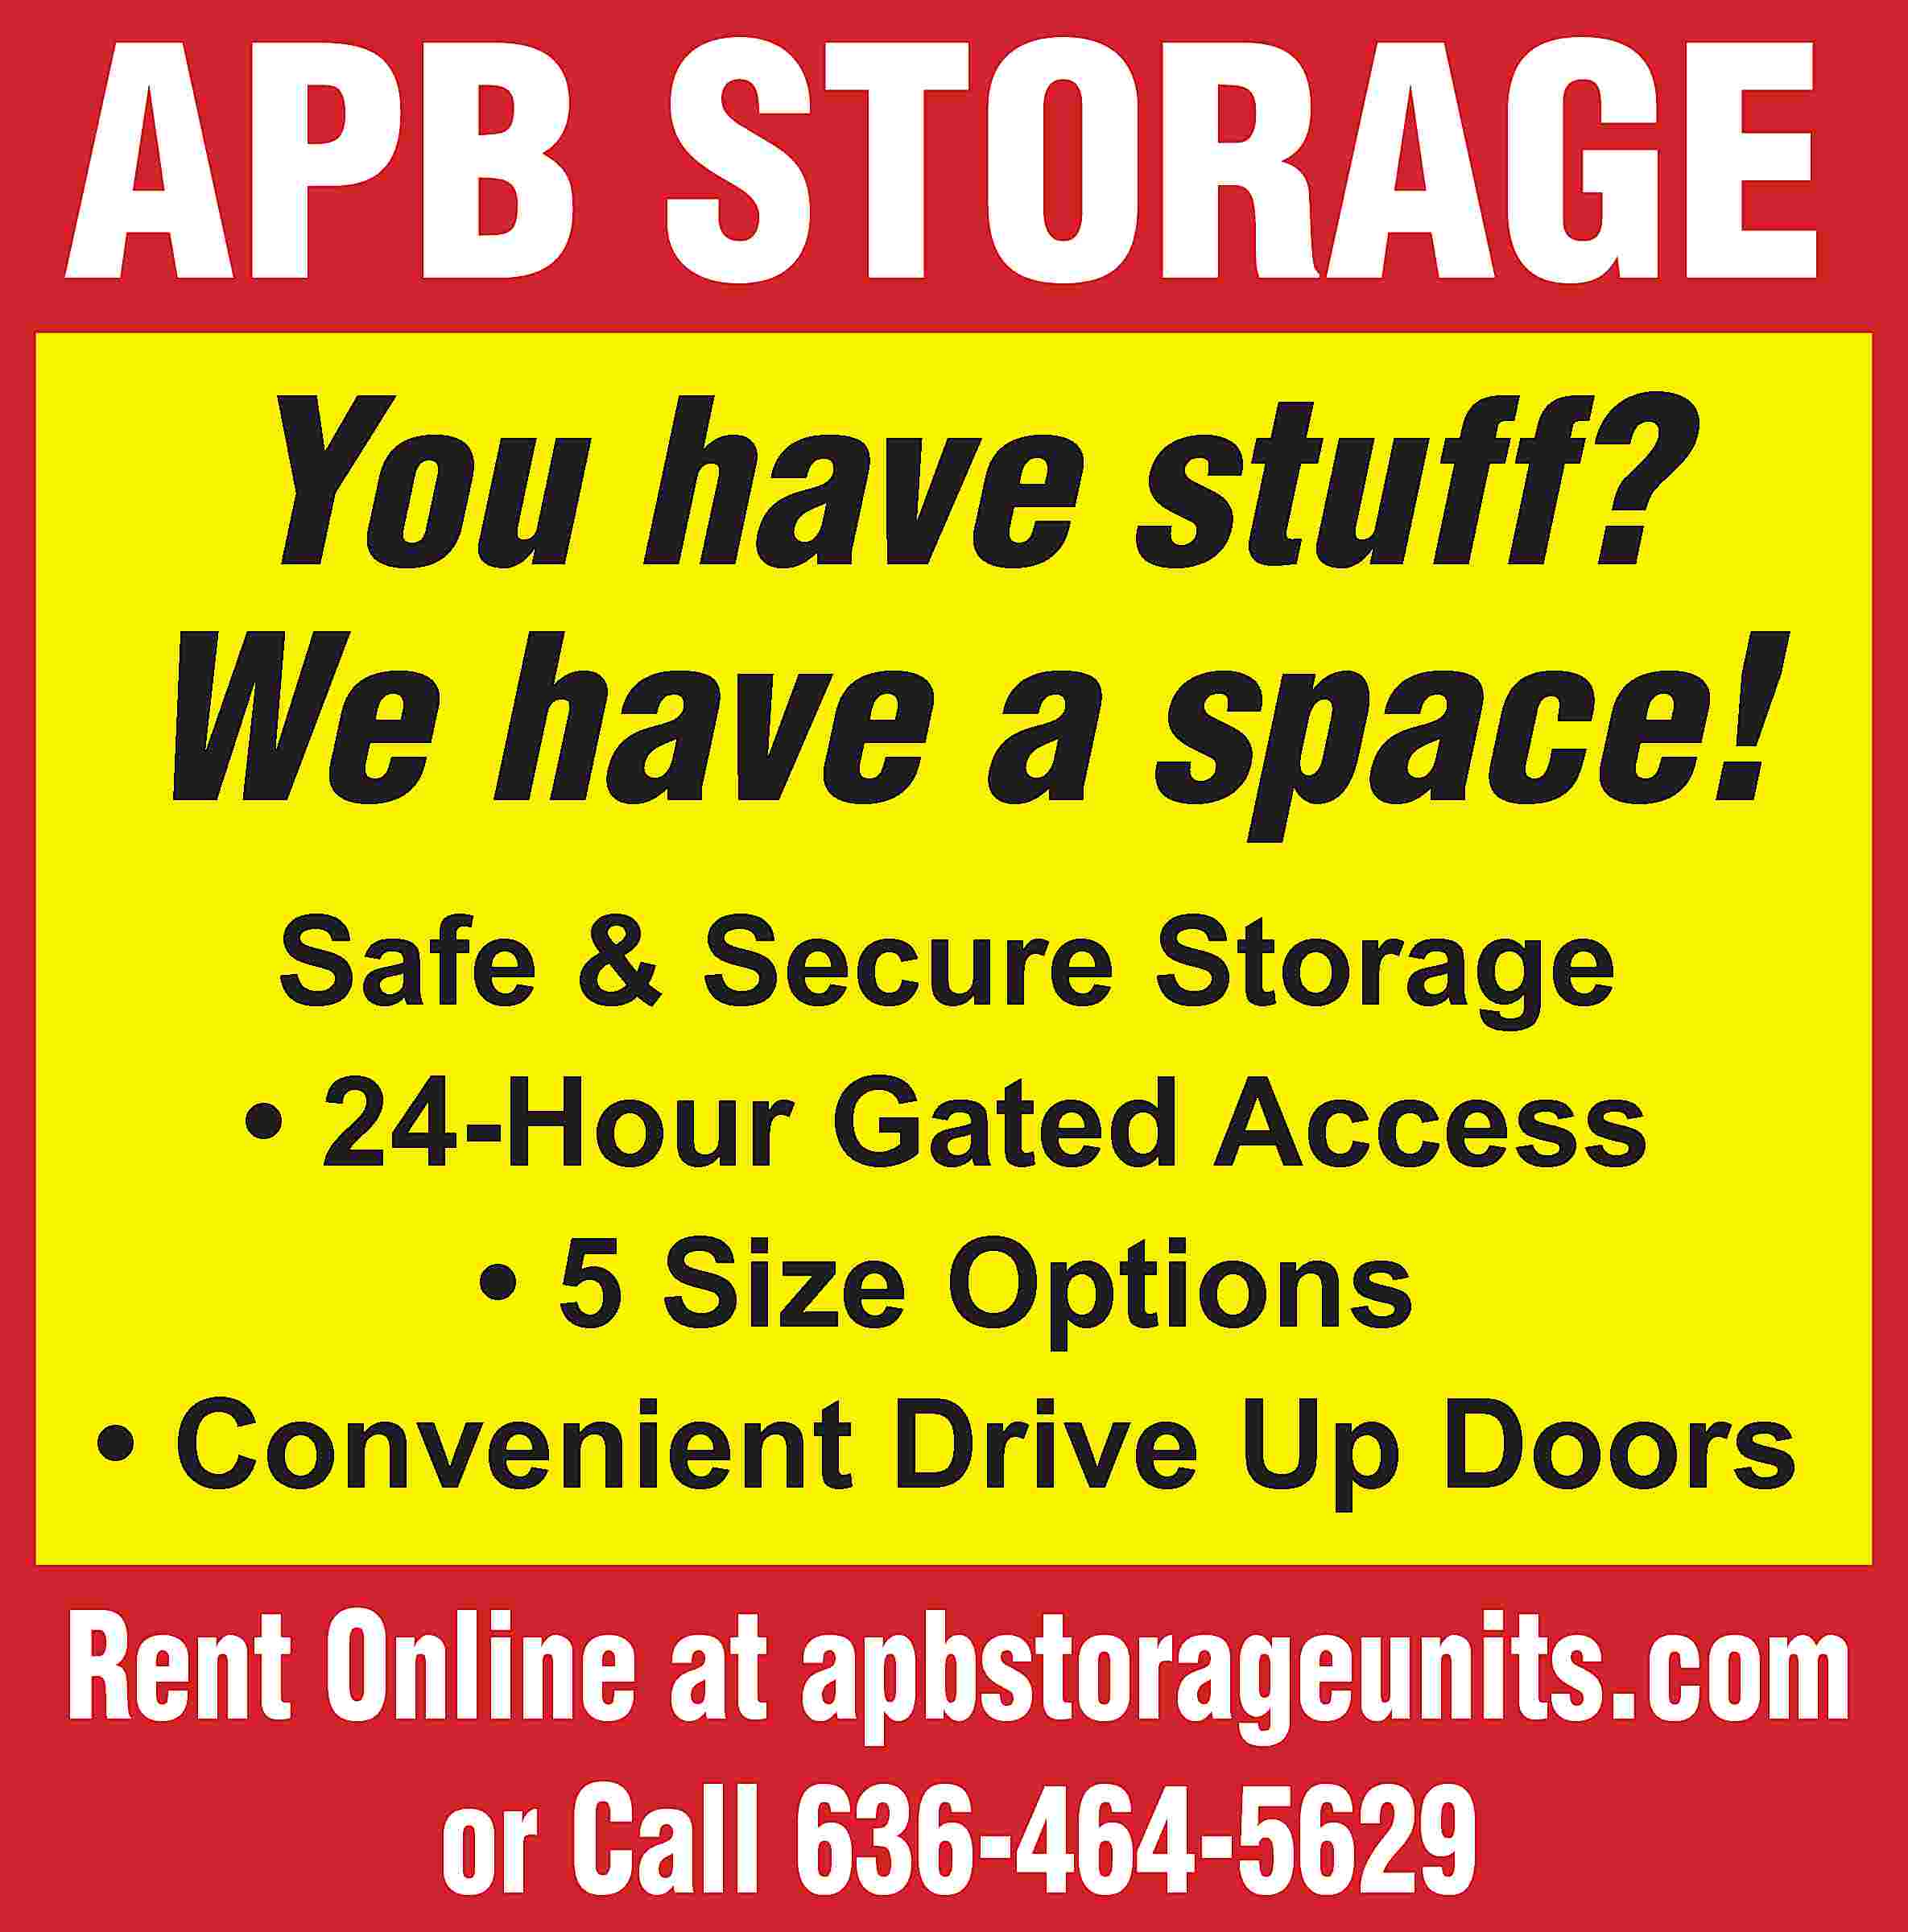 APB STORAGE You have stuff?  APB STORAGE You have stuff? We have a space! Safe & Secure Storage • 24-Hour Gated Access • 5 Size Options • Convenient Drive Up Doors Rent Online at apbstorageunits.com or Call 636-464-5629